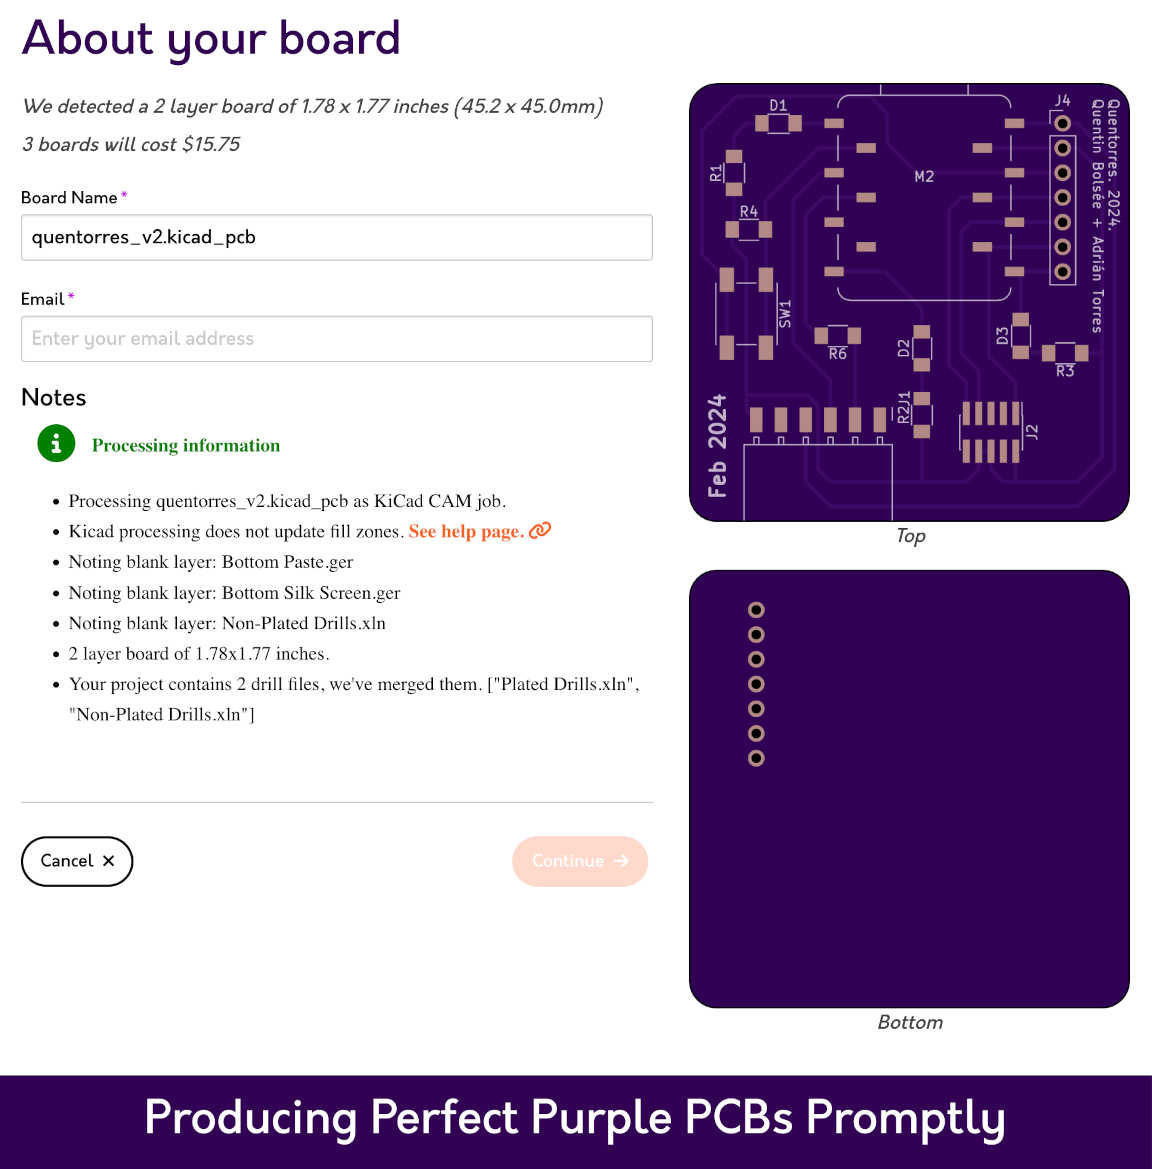 oshpark about your board screen